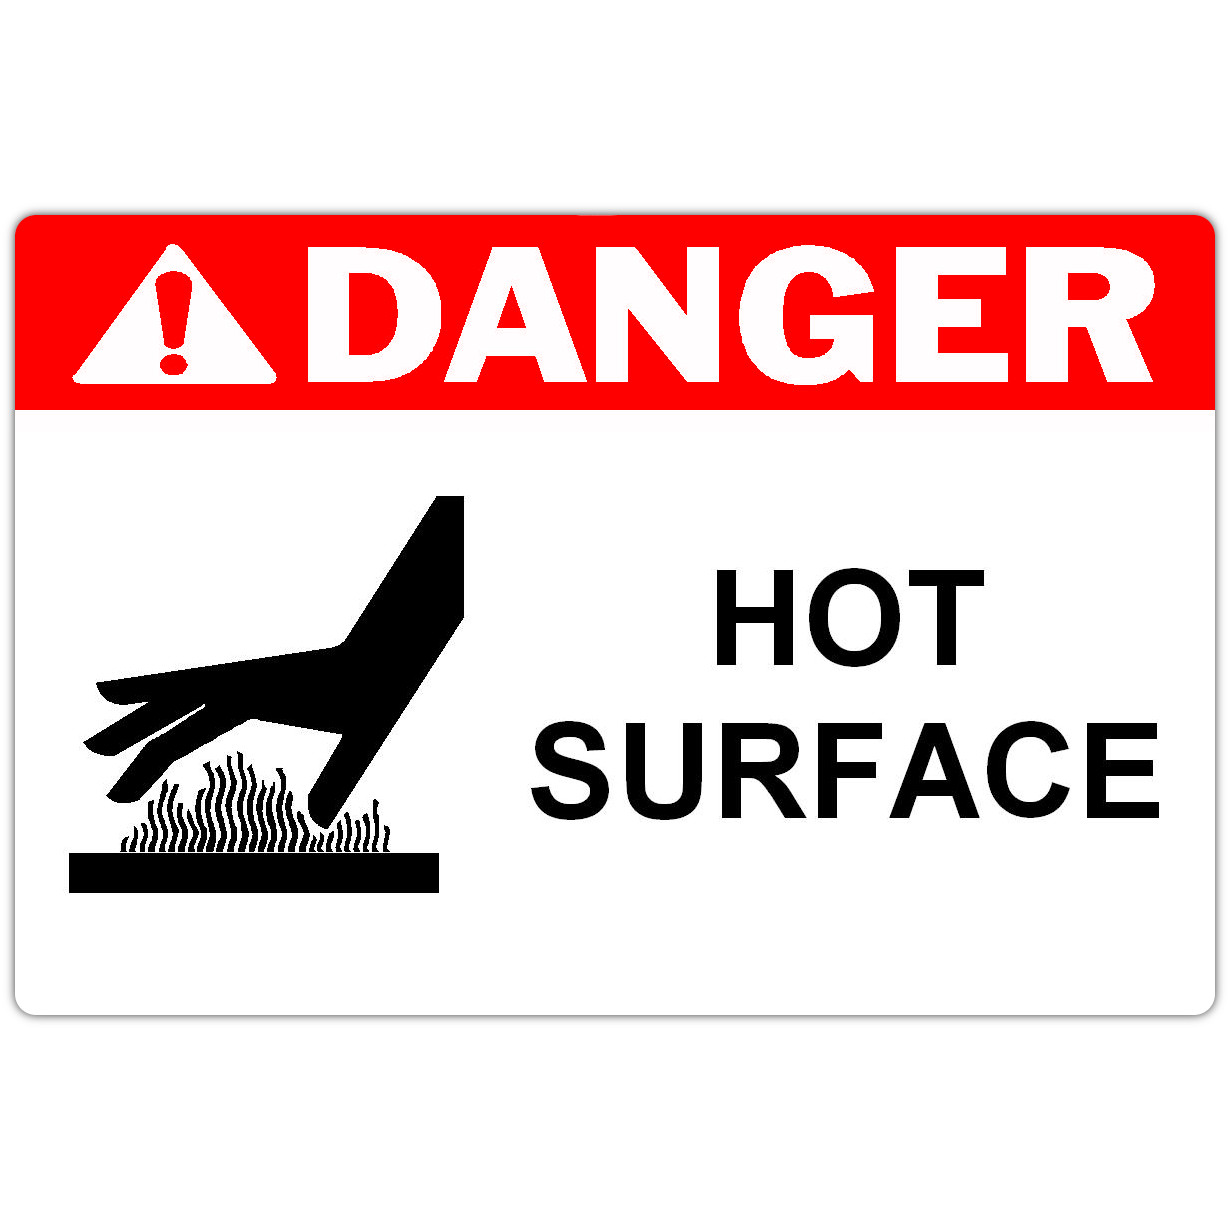 Detail view for 4" x 6" DANGER Hot Surface Safety Label